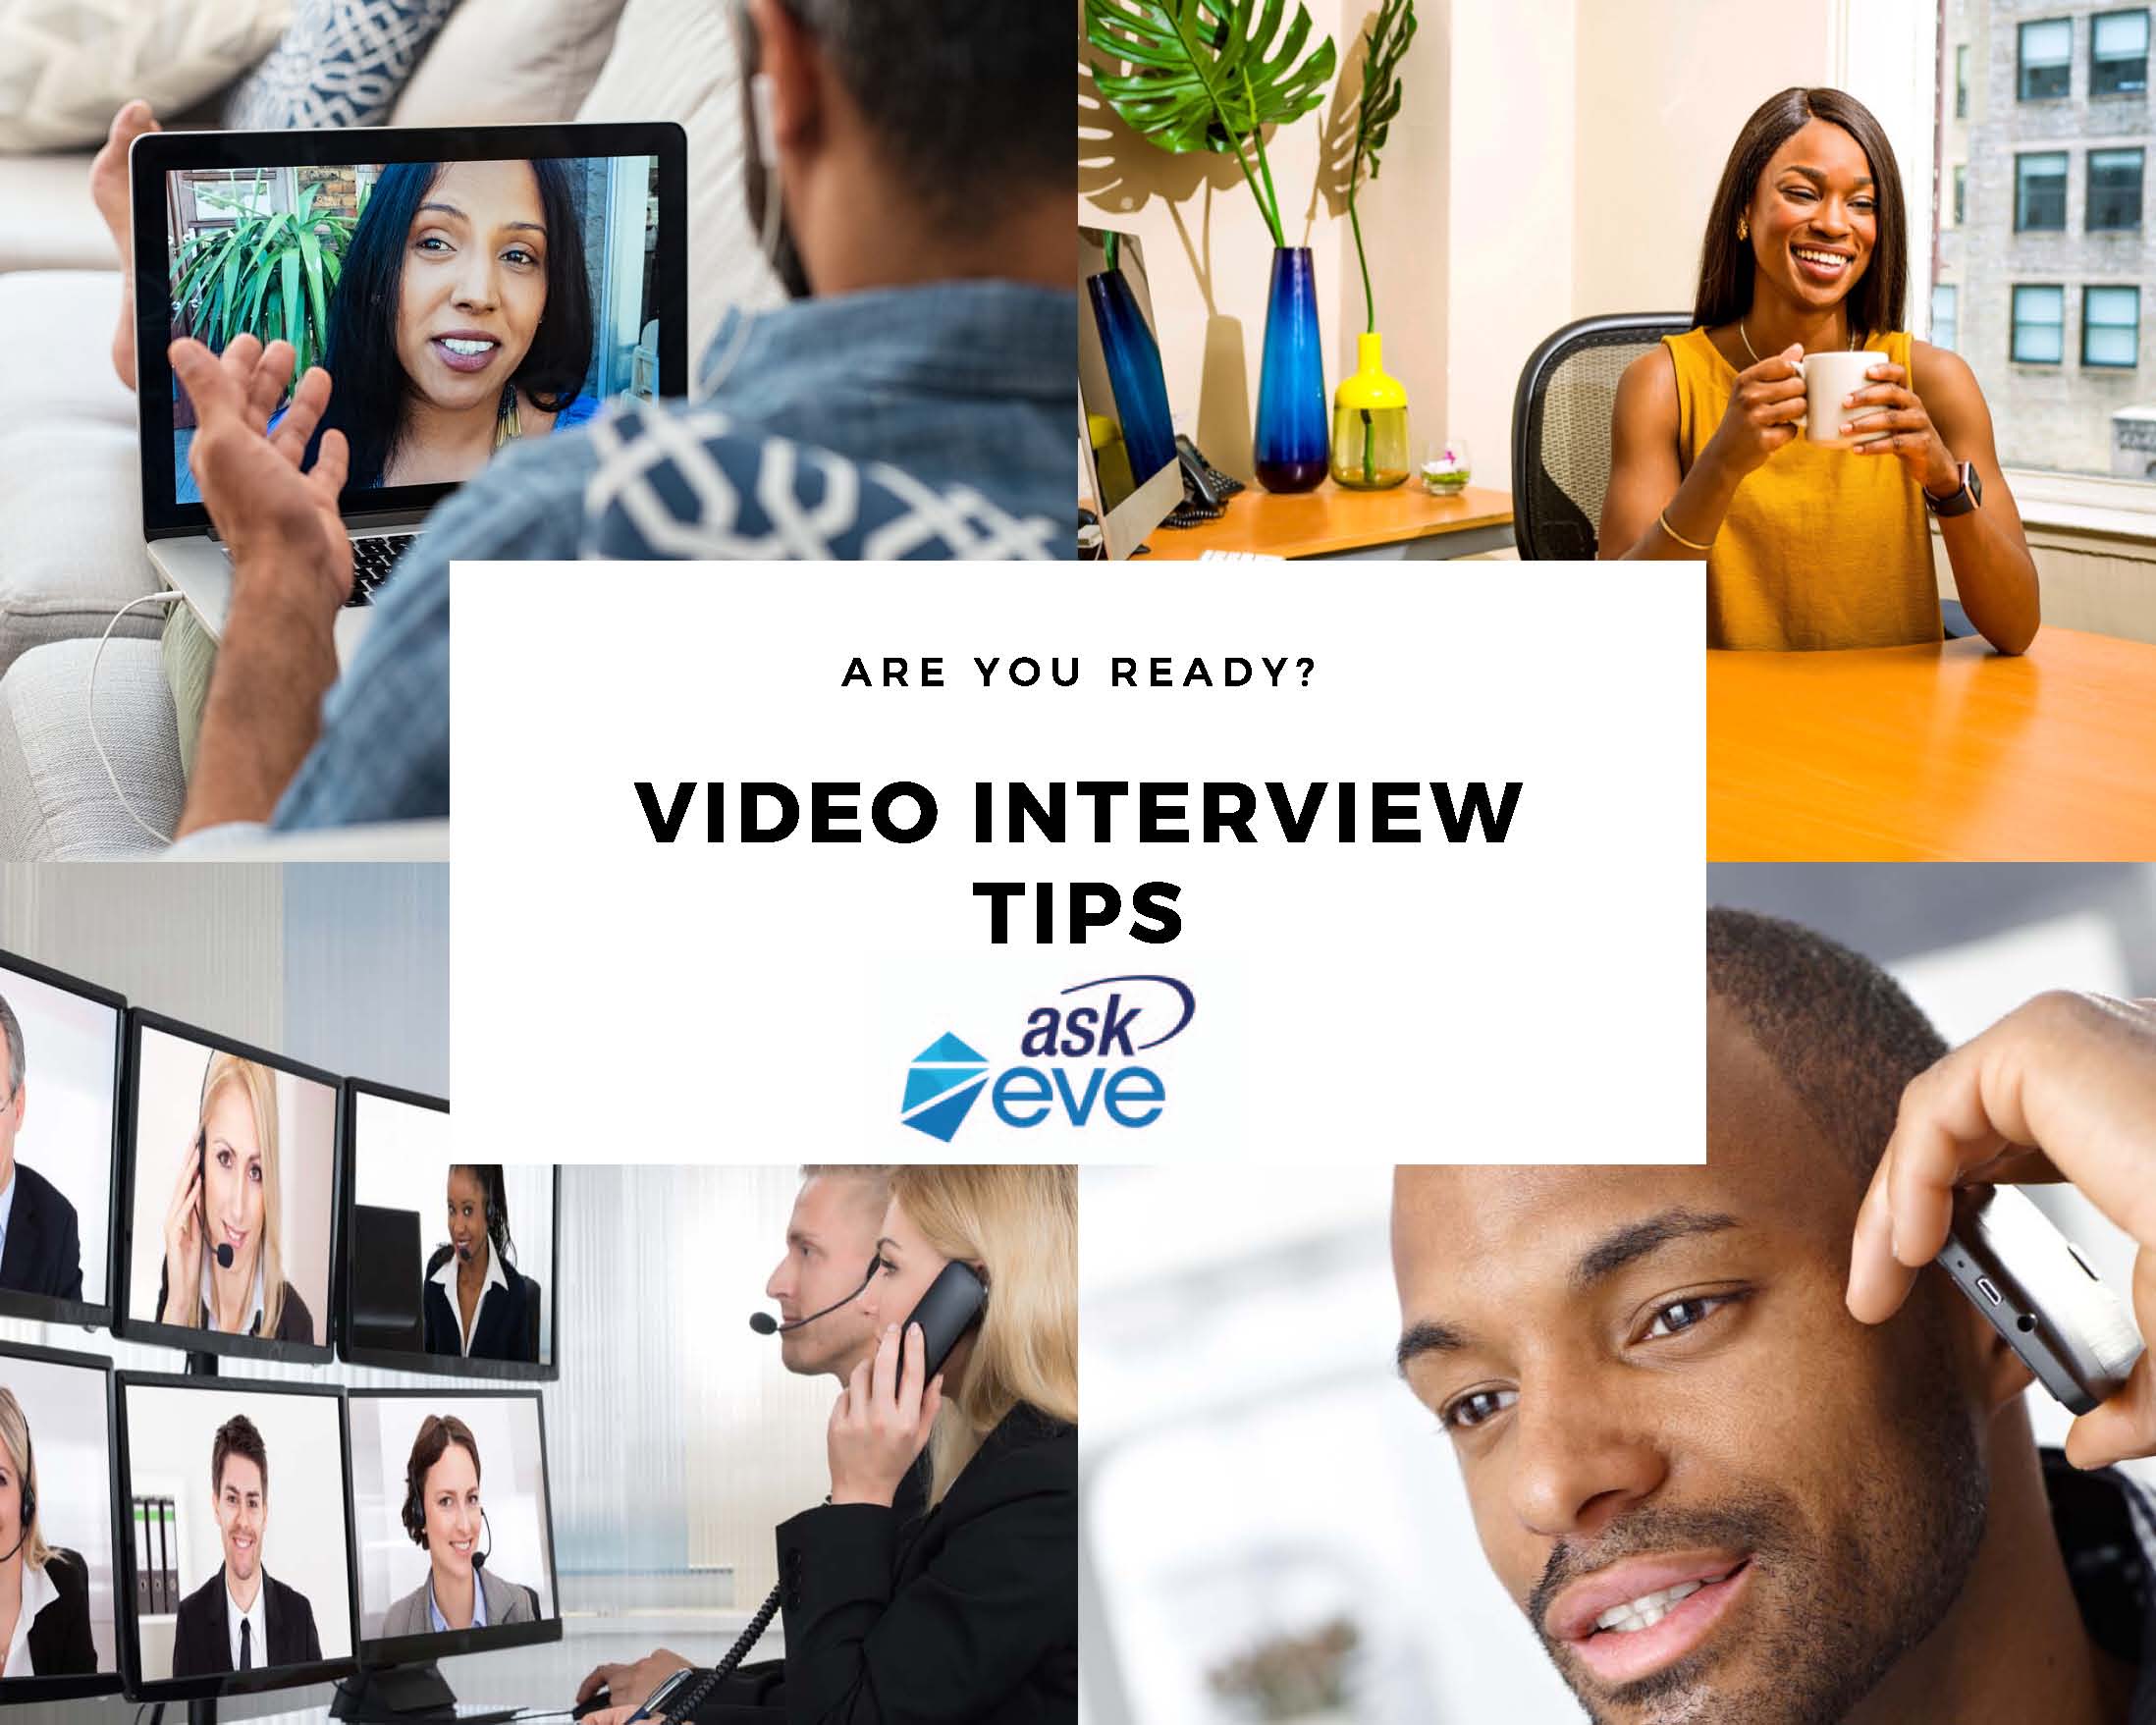 Overcome your fears, video interviews are here